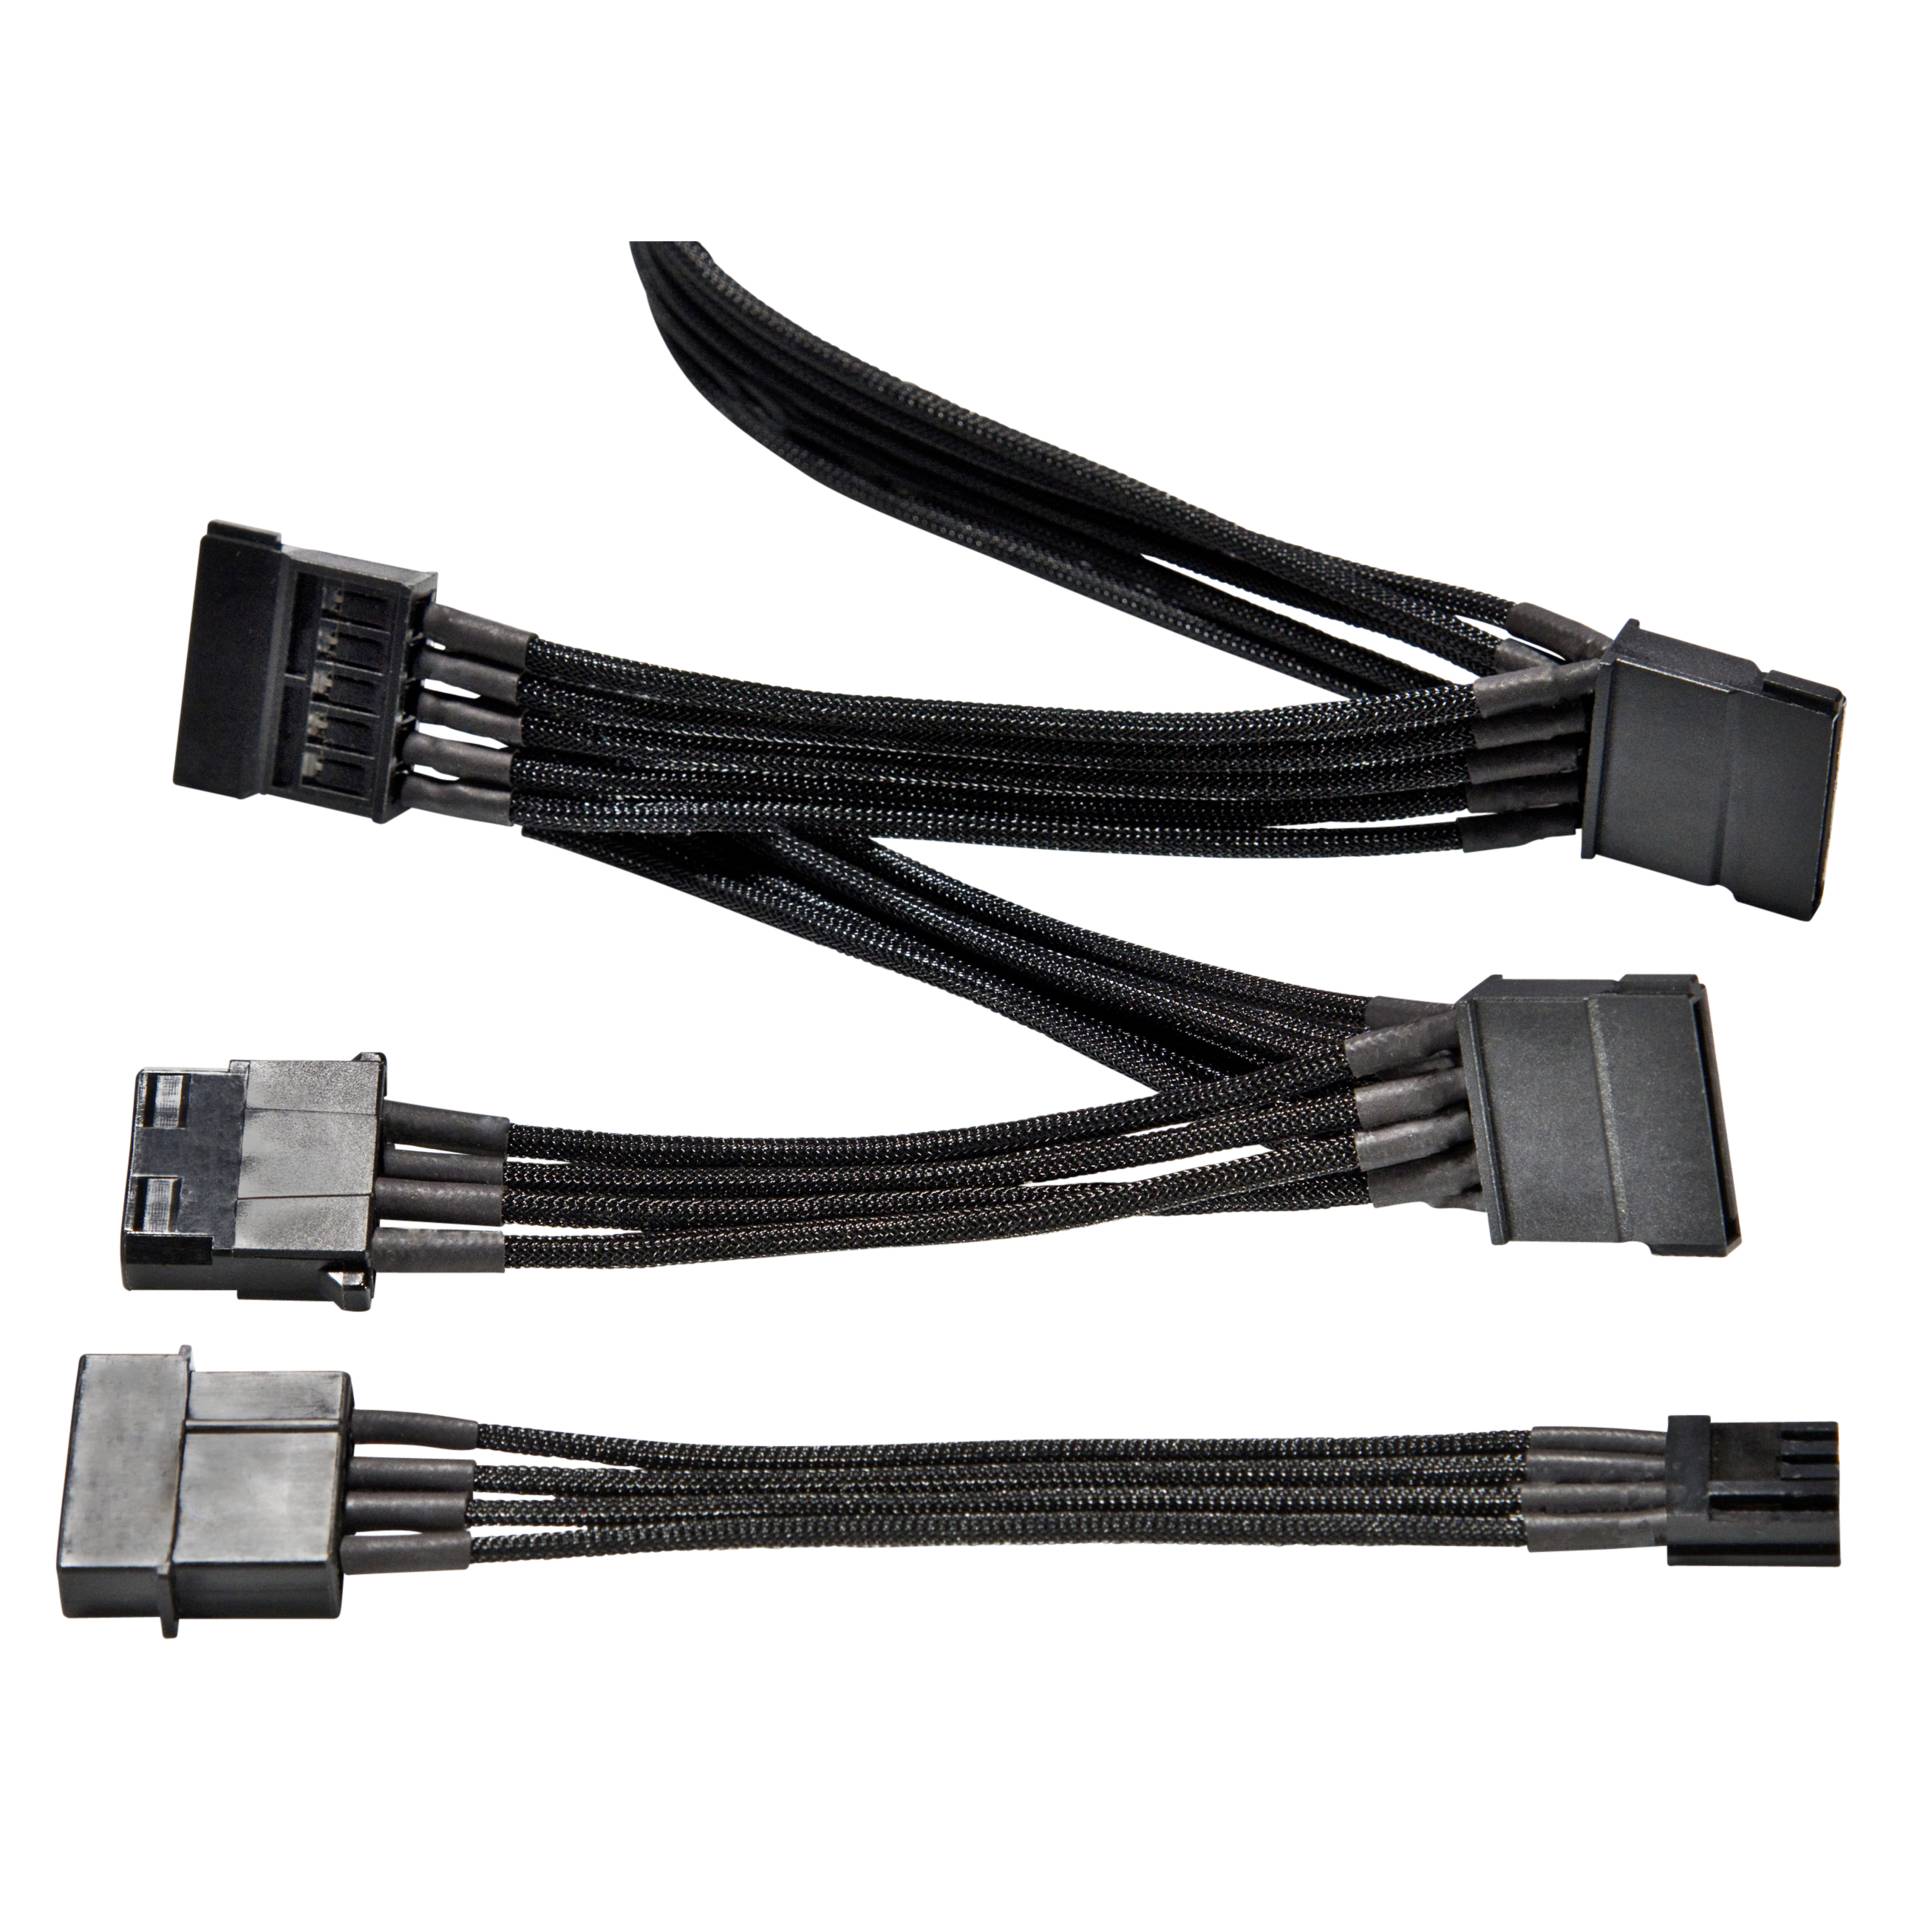 be quiet! Sleeved Power Cable-CM-61050, 3x SATA + 1x HDD/FDD, 1000mm